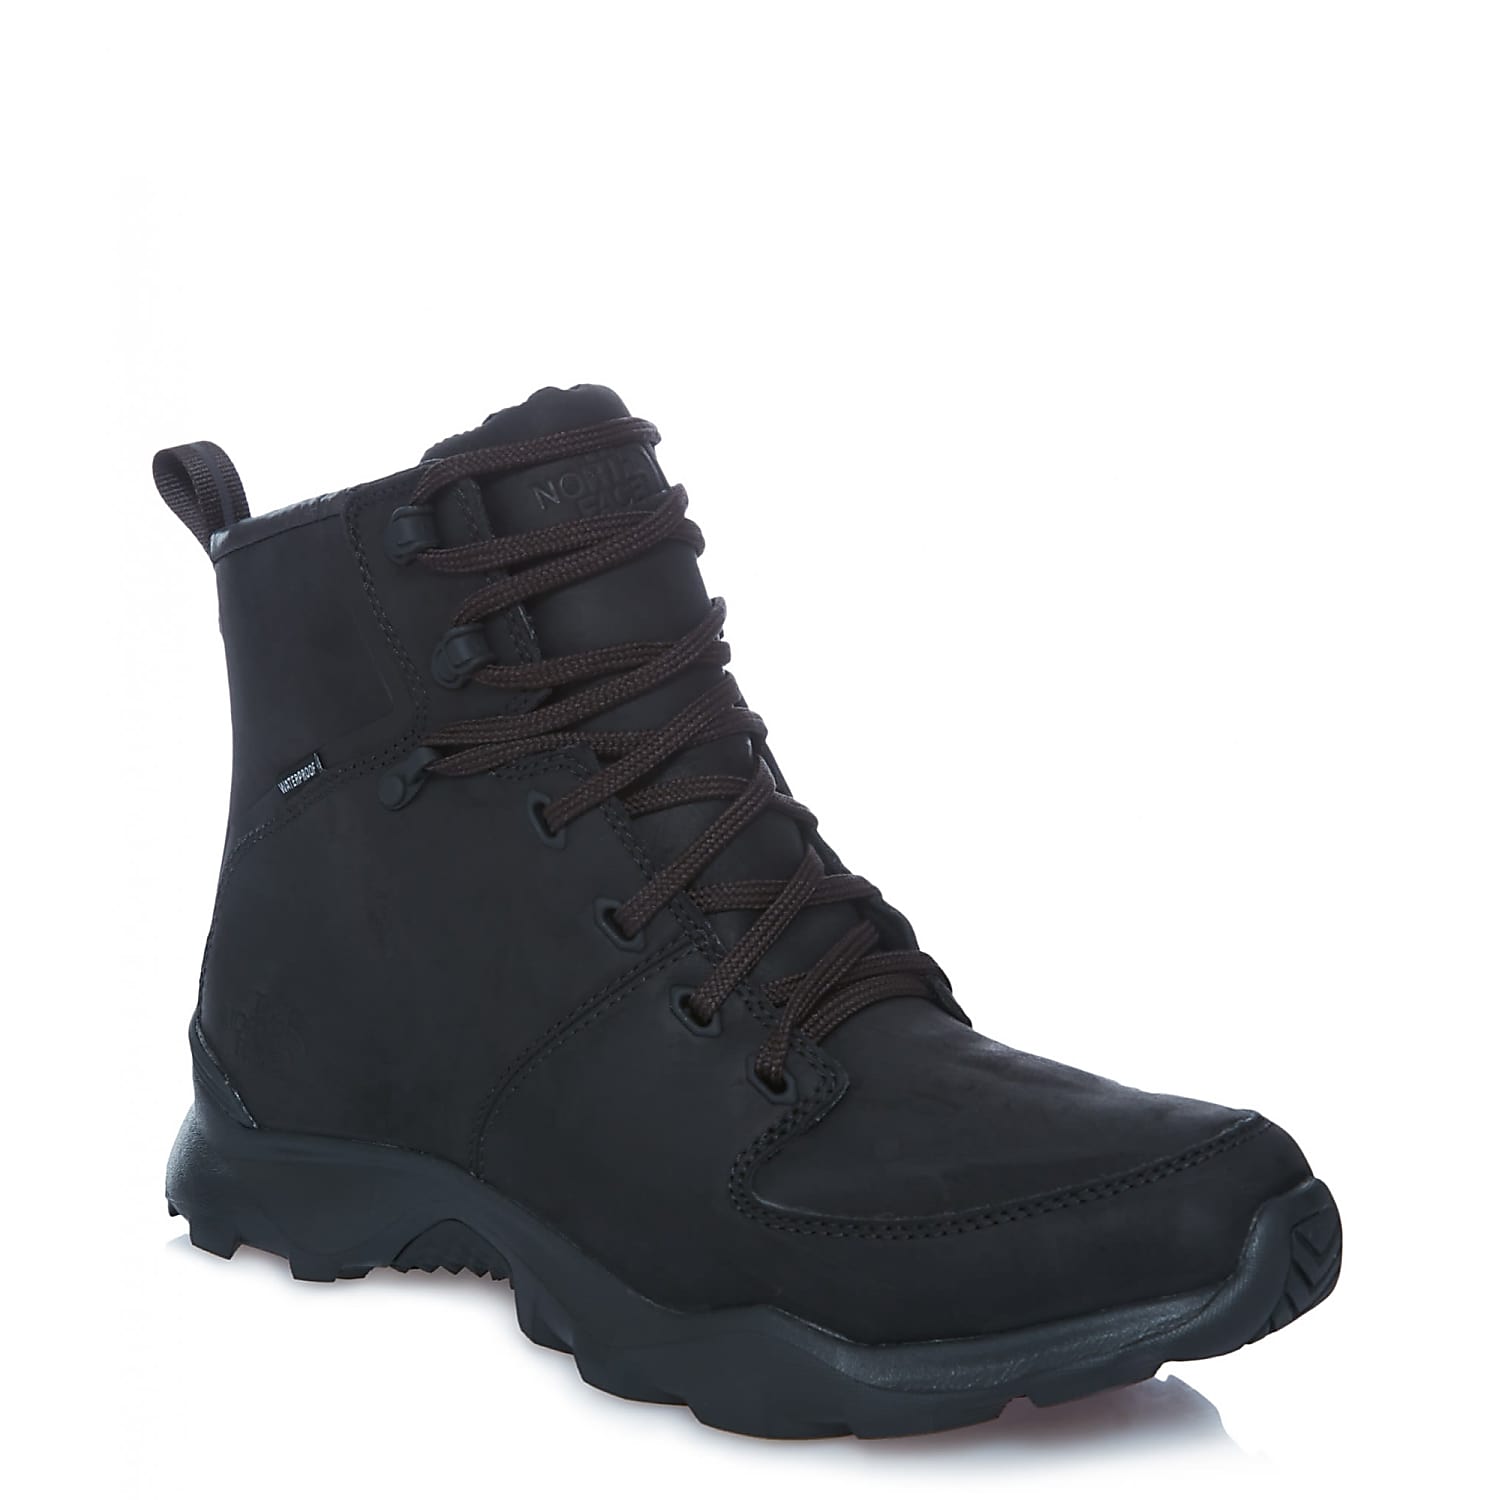 the north face men's thermoball versa 100g waterproof winter boots